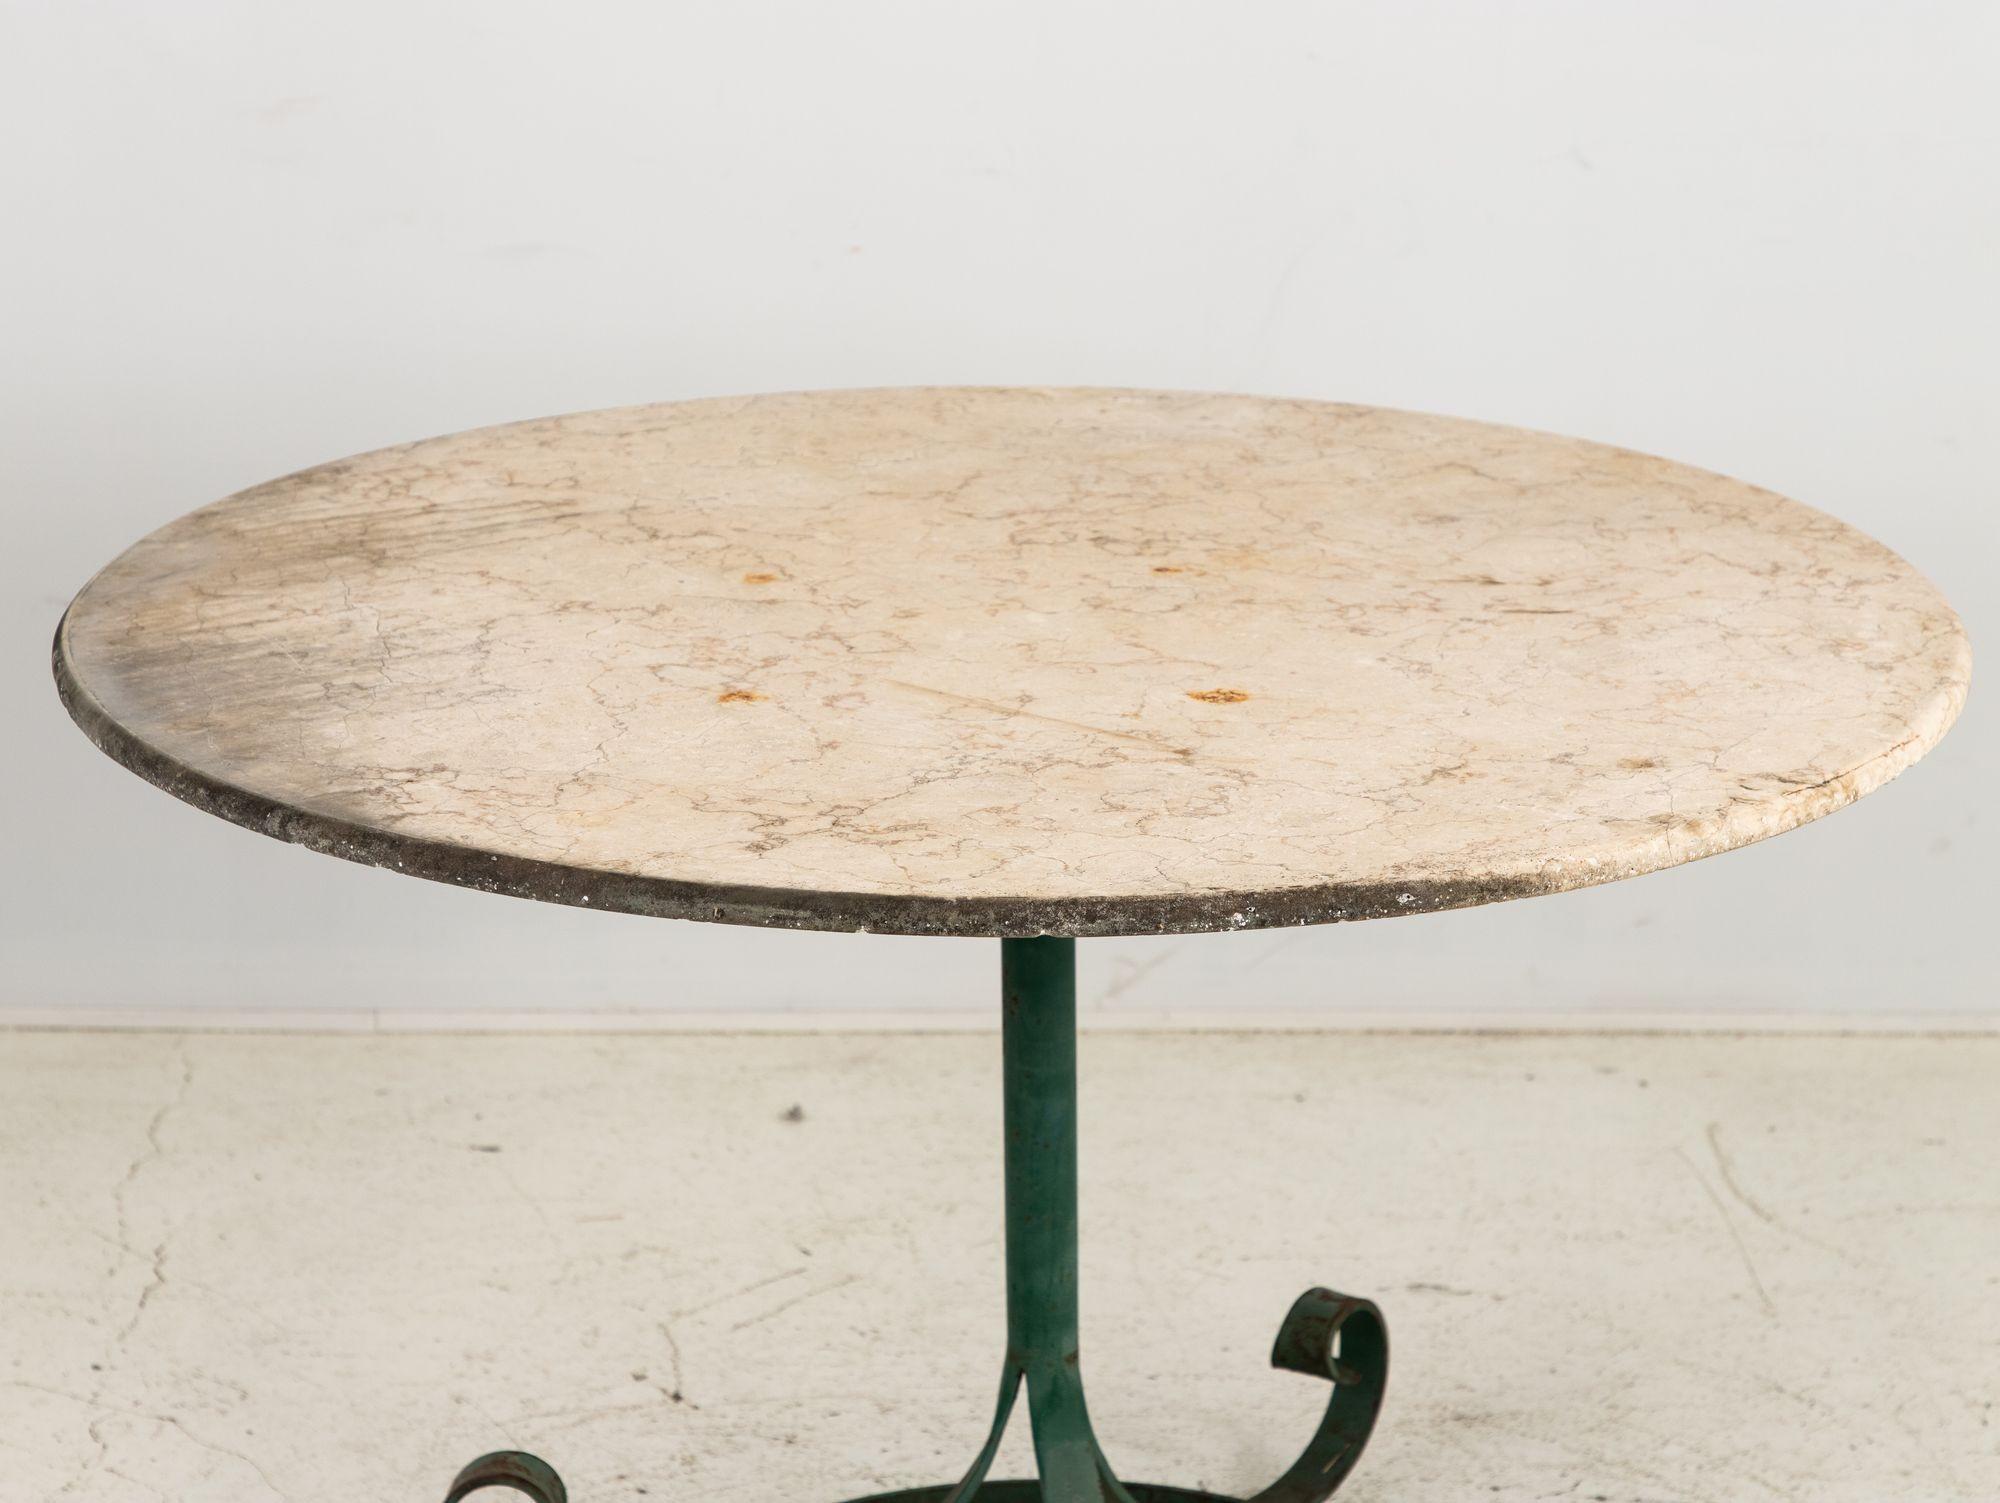 A mid-20th-century French garden or pub table adorned with a luxurious white marble top exudes a timeless charm that marries elegance with rustic allure. Its green-painted base adds a touch of vintage character, reminiscent of quaint French bistros